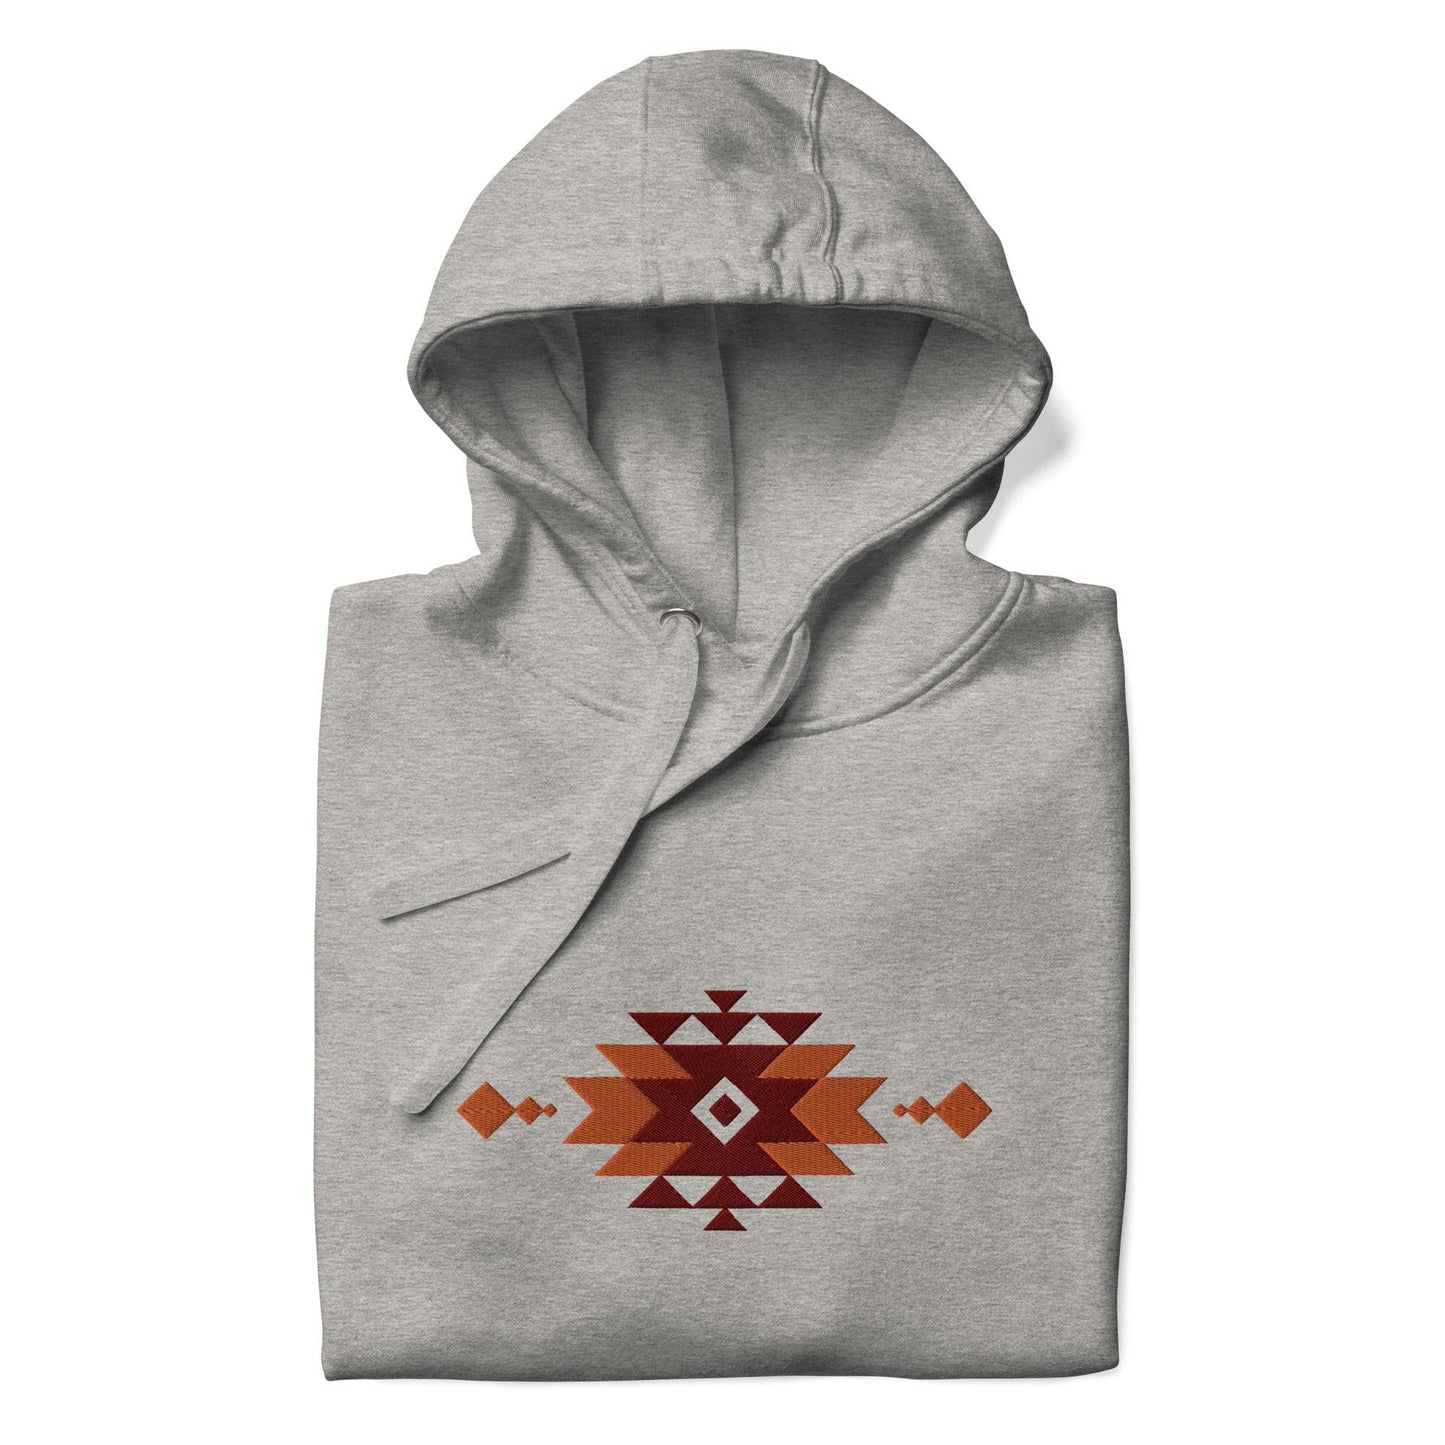 Southwestern Embroidered Hoodie - The Global Wanderer